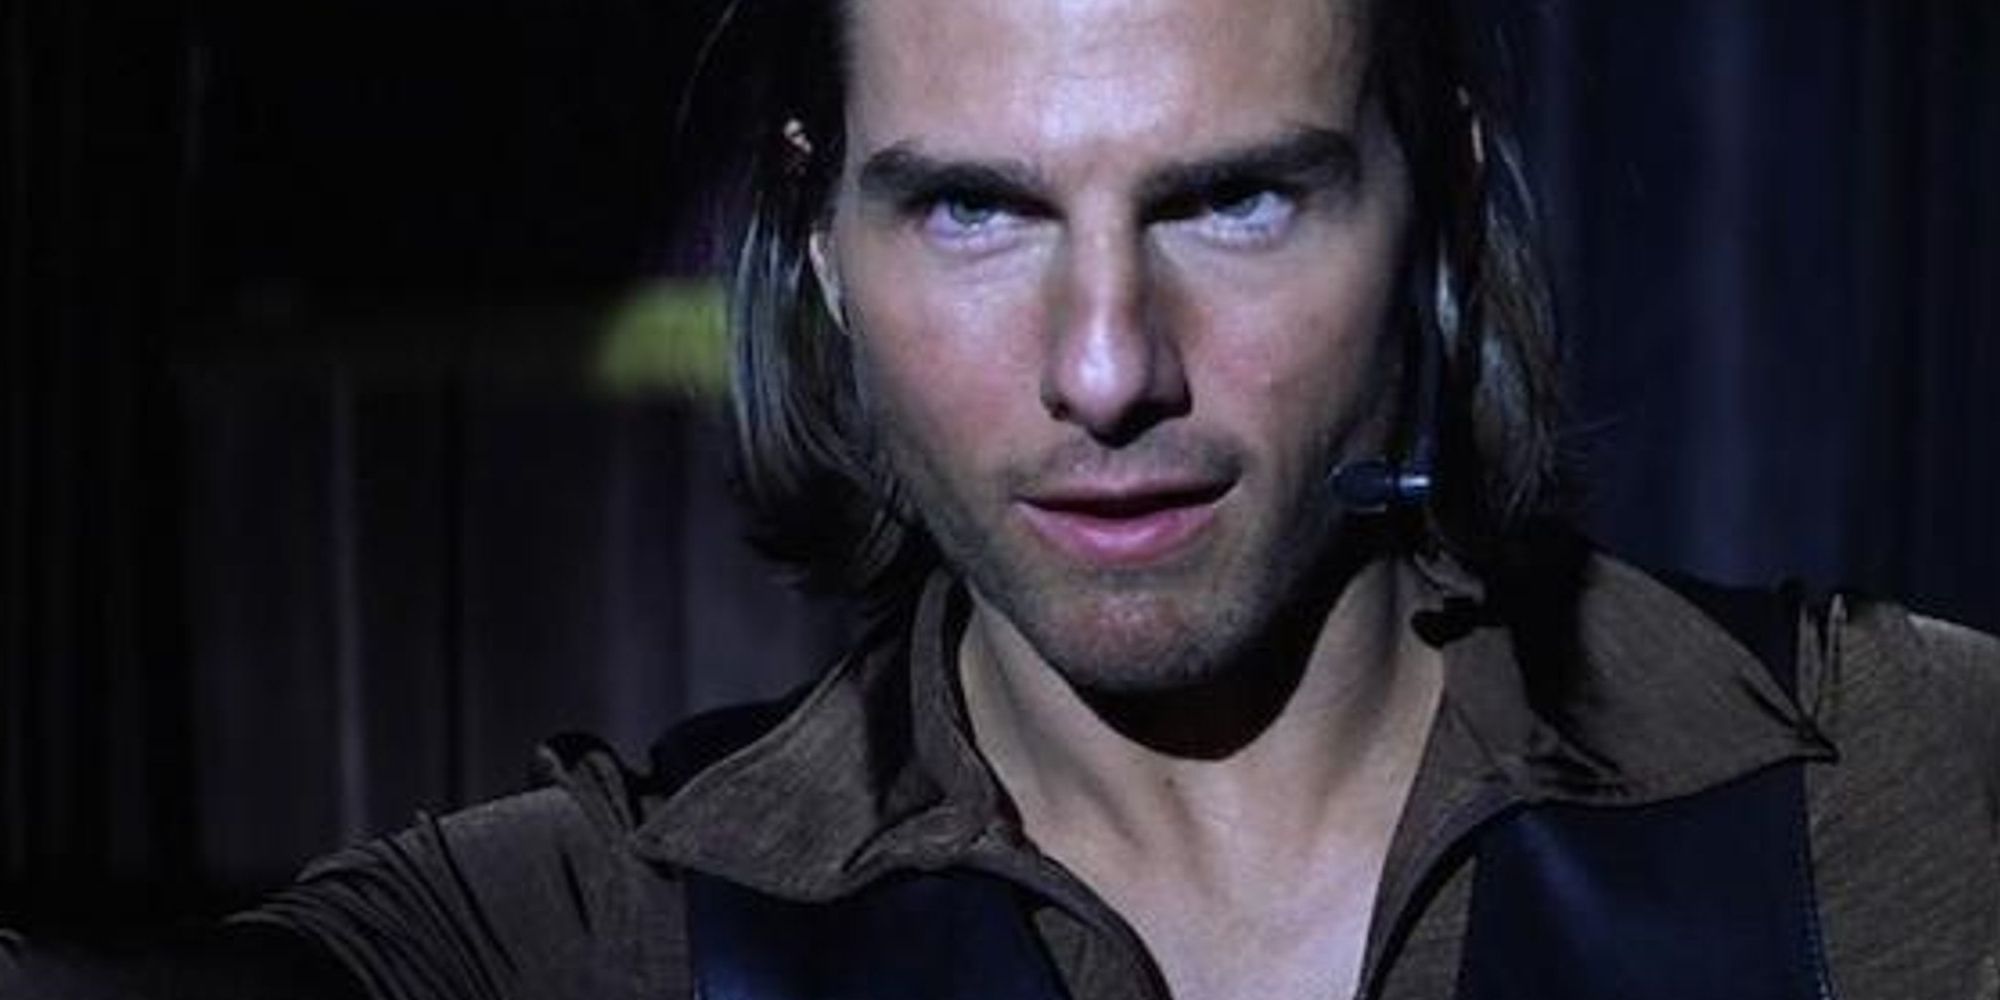 A close-up of Tom Cruise on stage in Magnolia